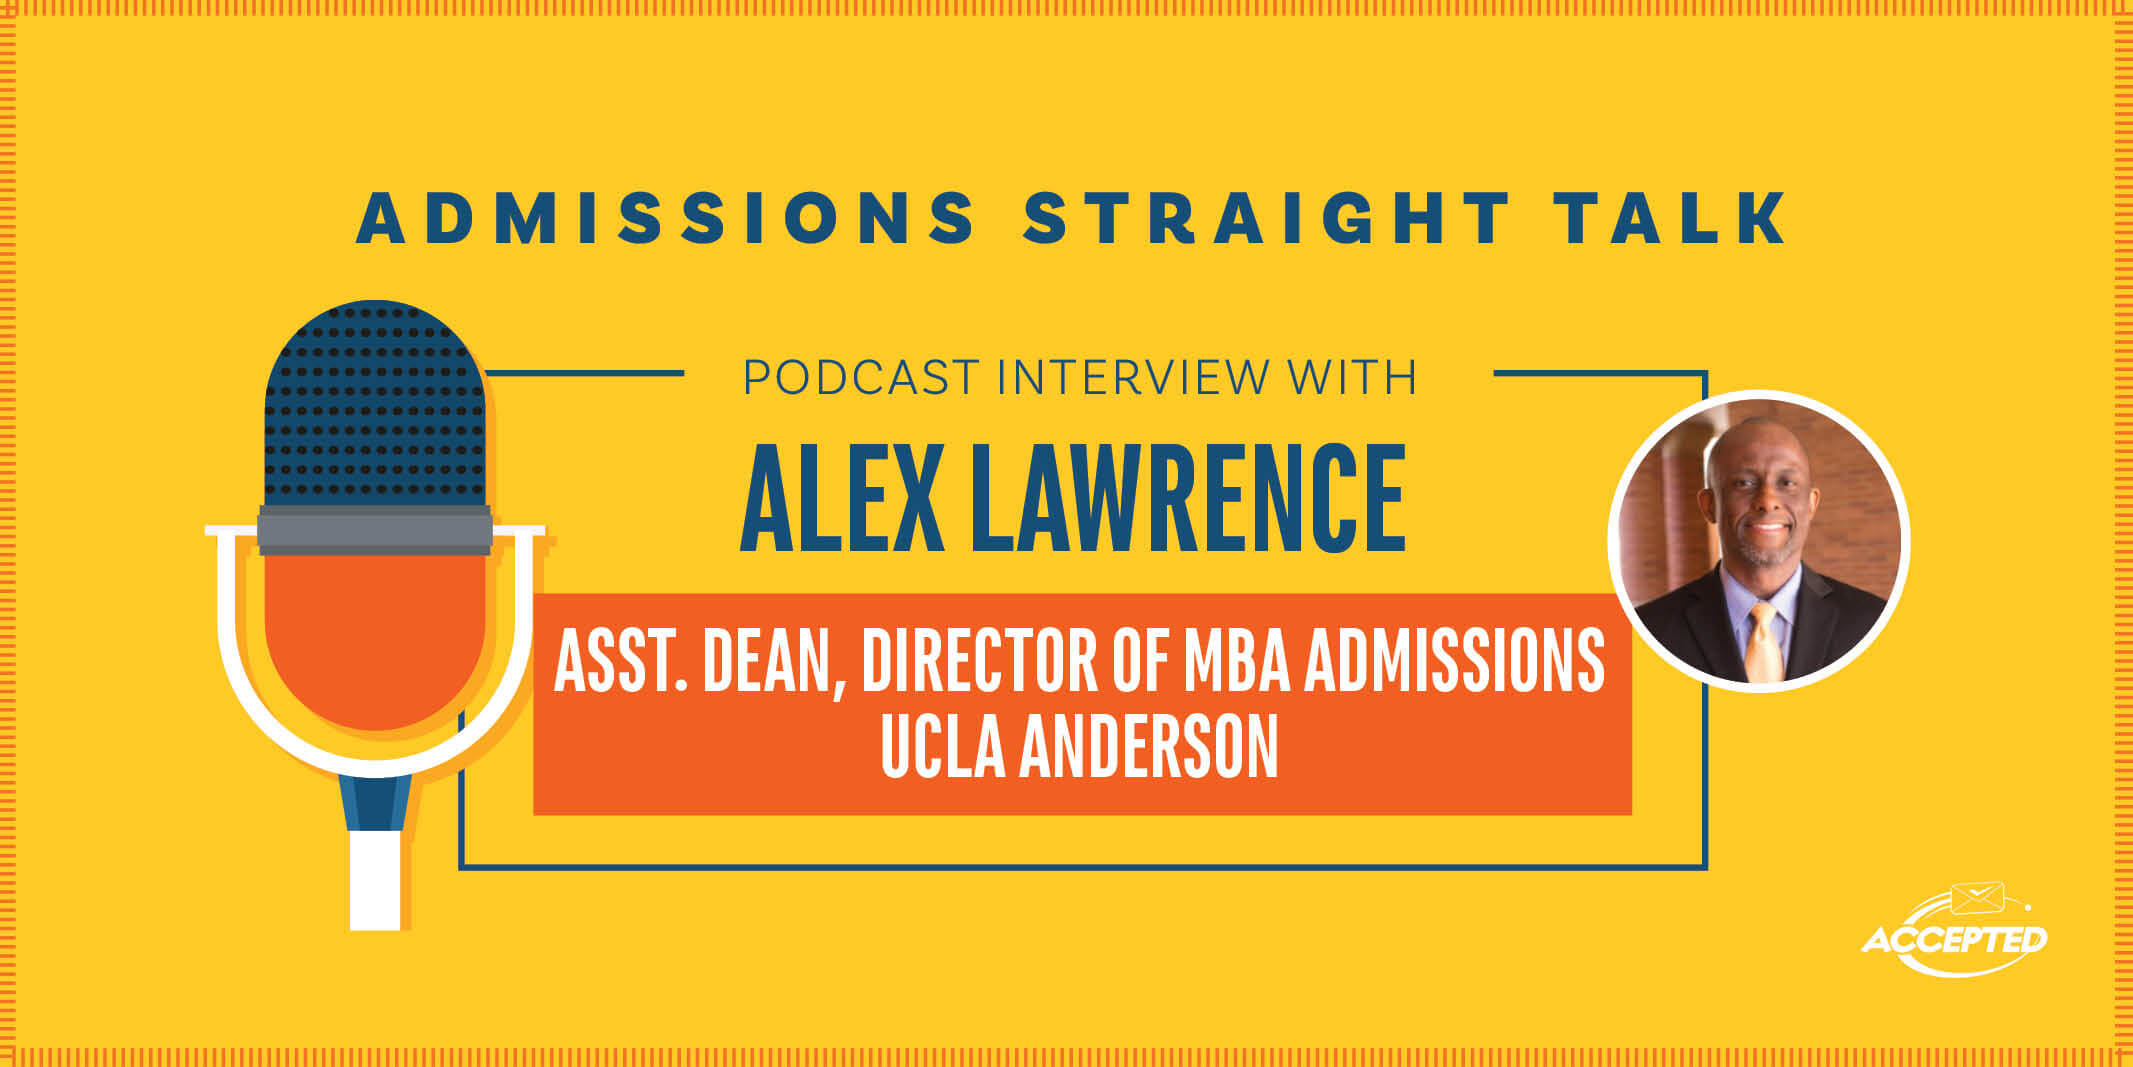 Podcast Interview with Alex Lawrence, Assistant Dean and Director of MBA Admissions at UCLA Anderson